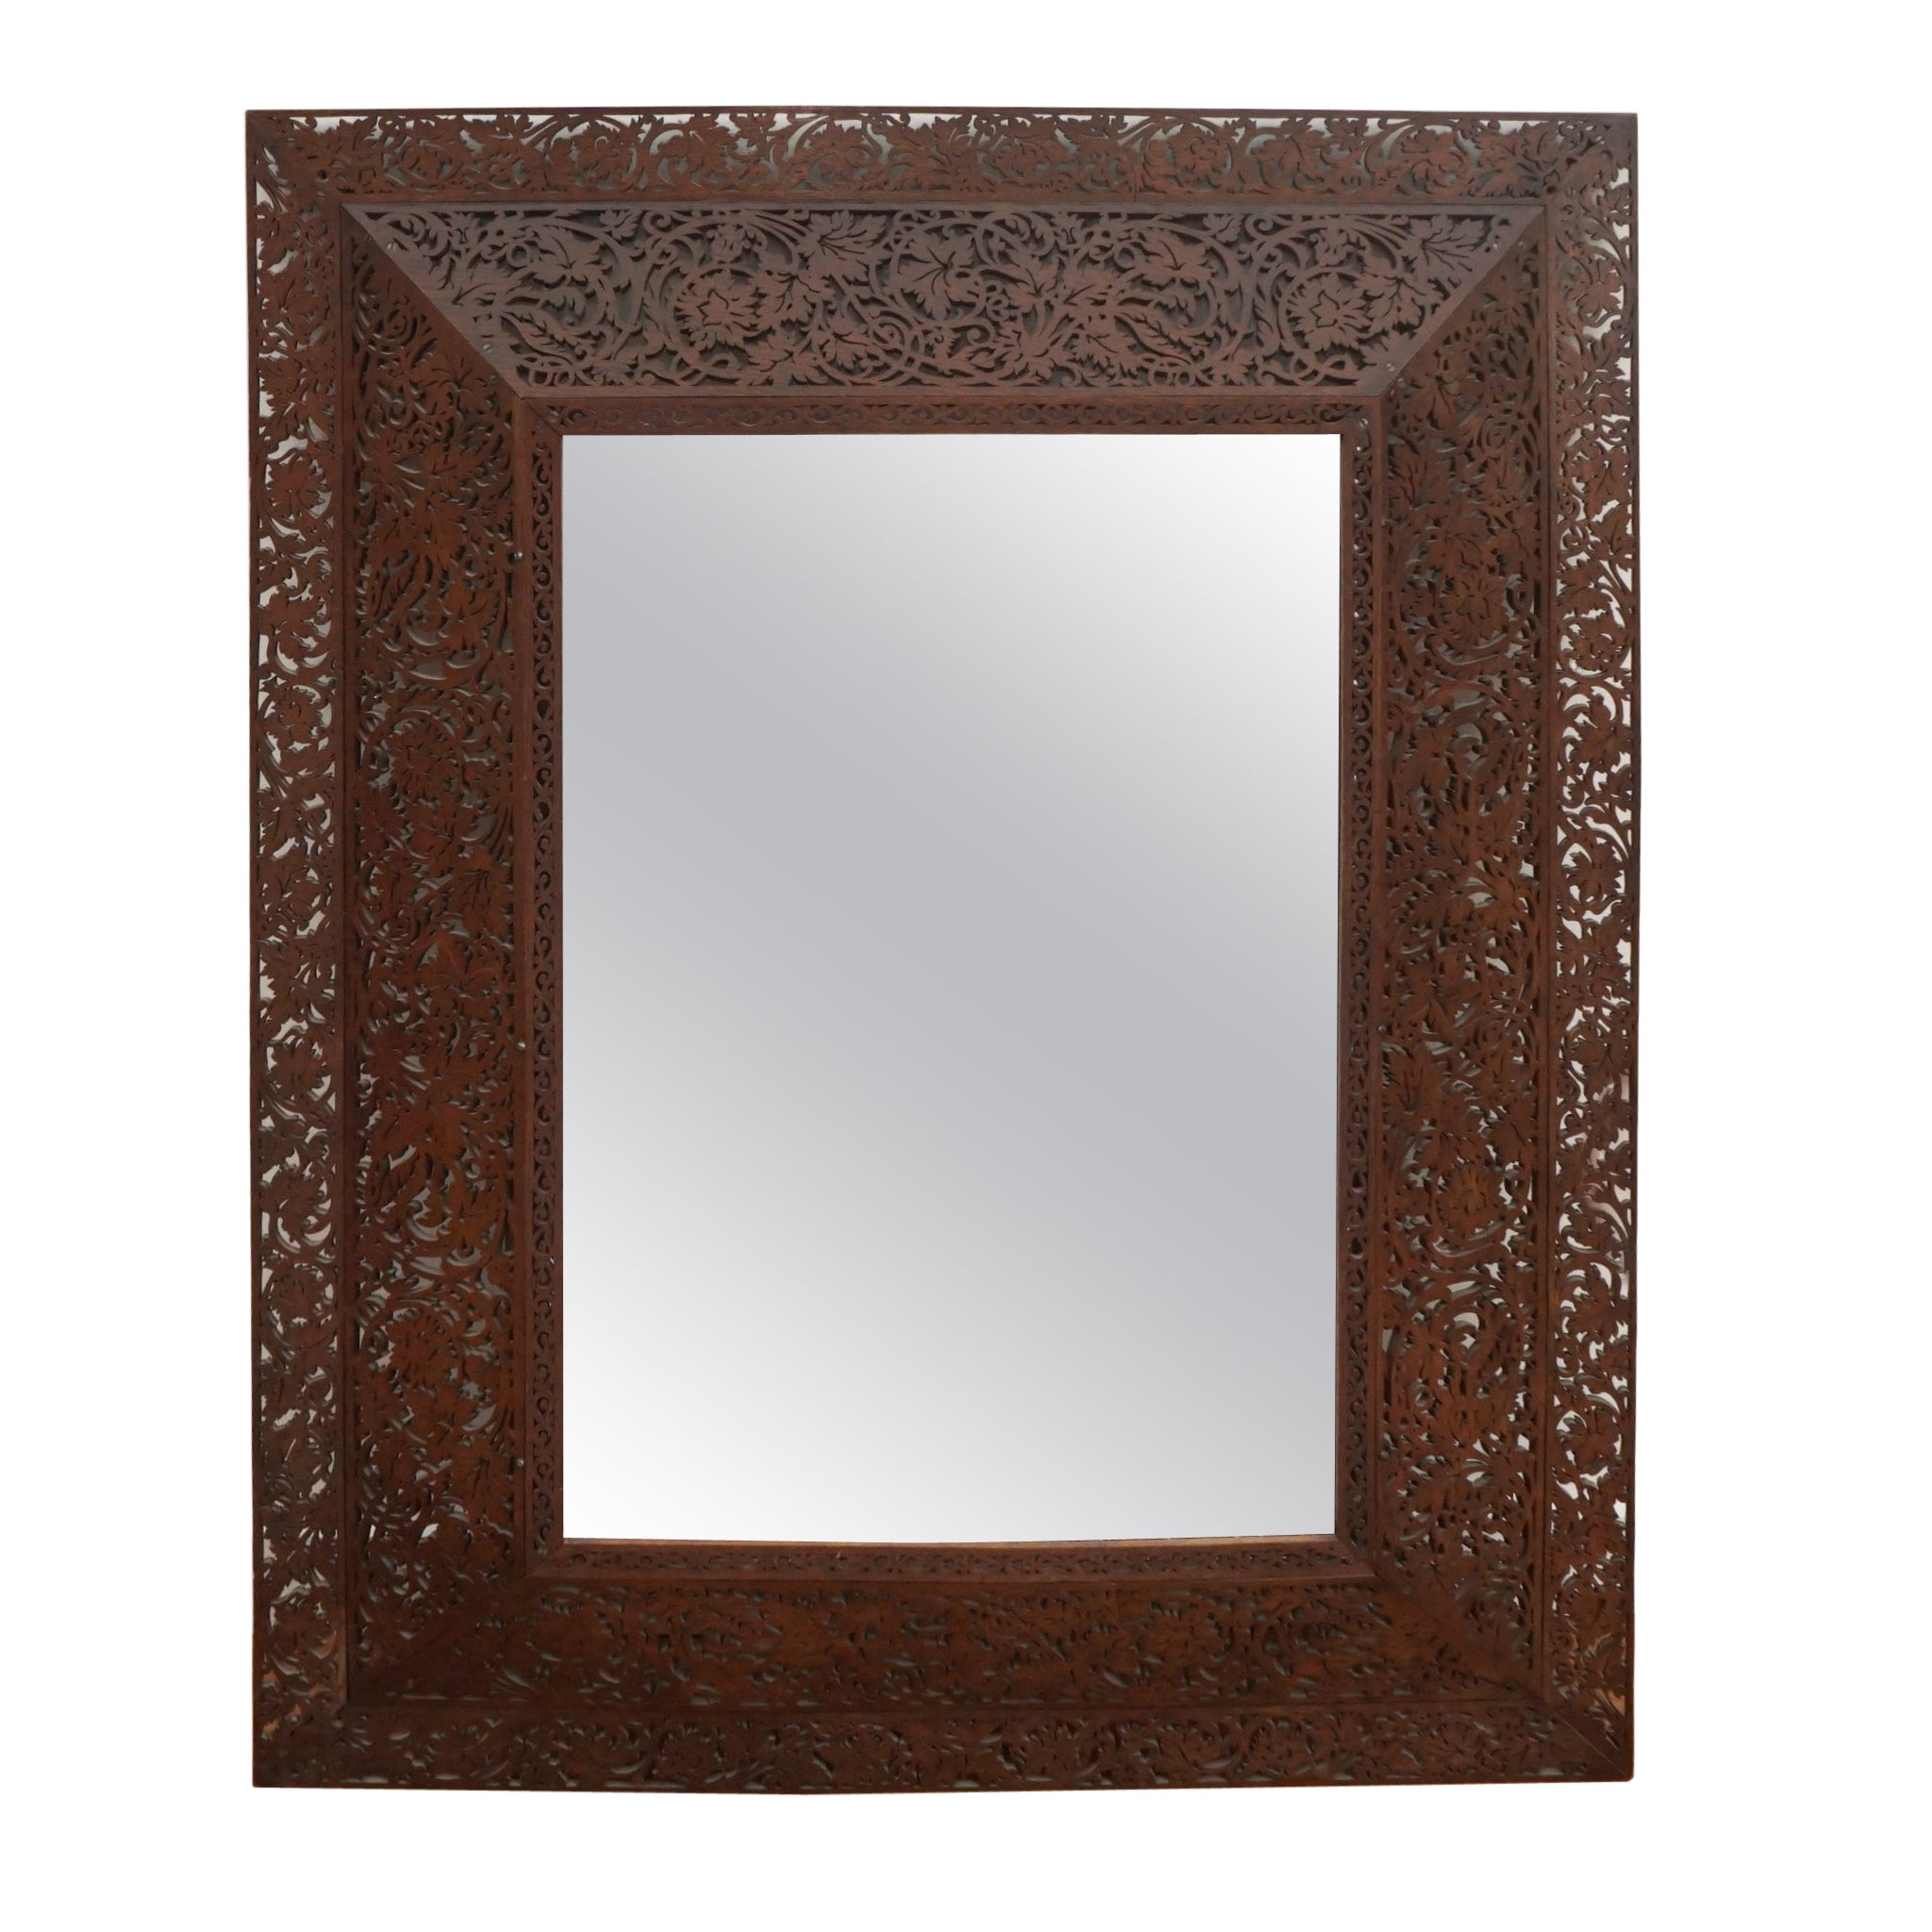 French Ornate Carved Wood Frame Mirror